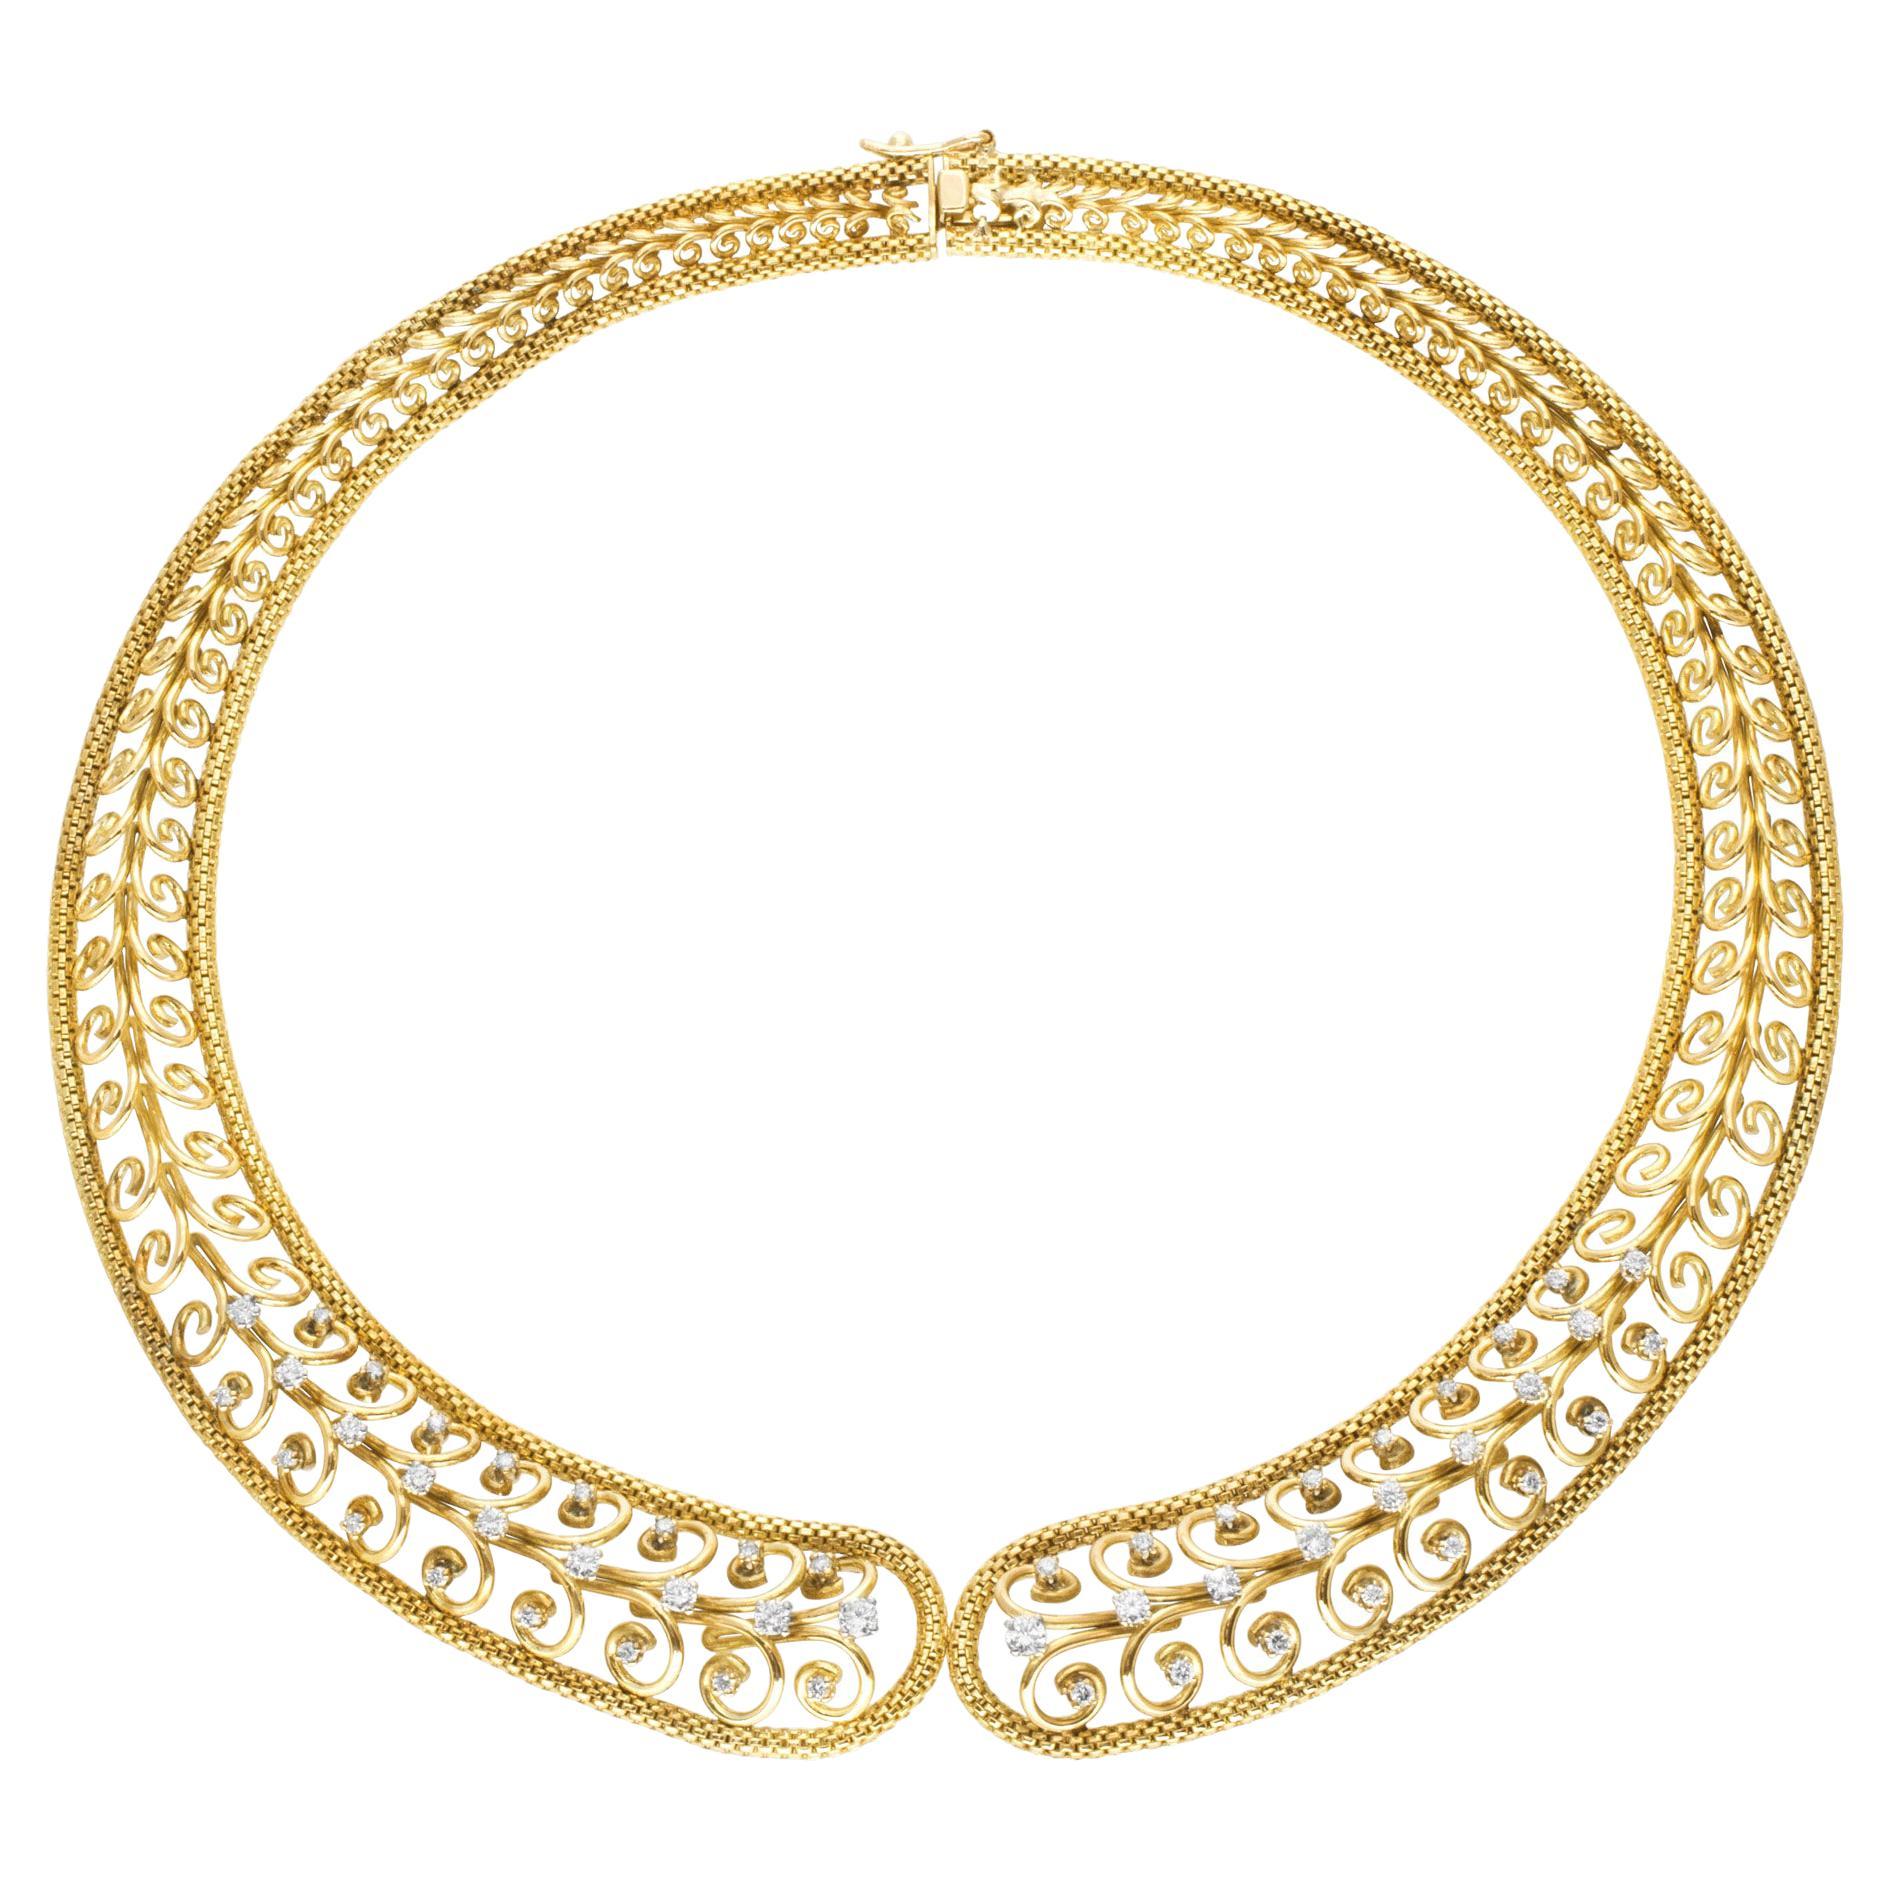 Necklace with Diamond Accents in 18k Yellow Gold Swirl Link Choker For Sale